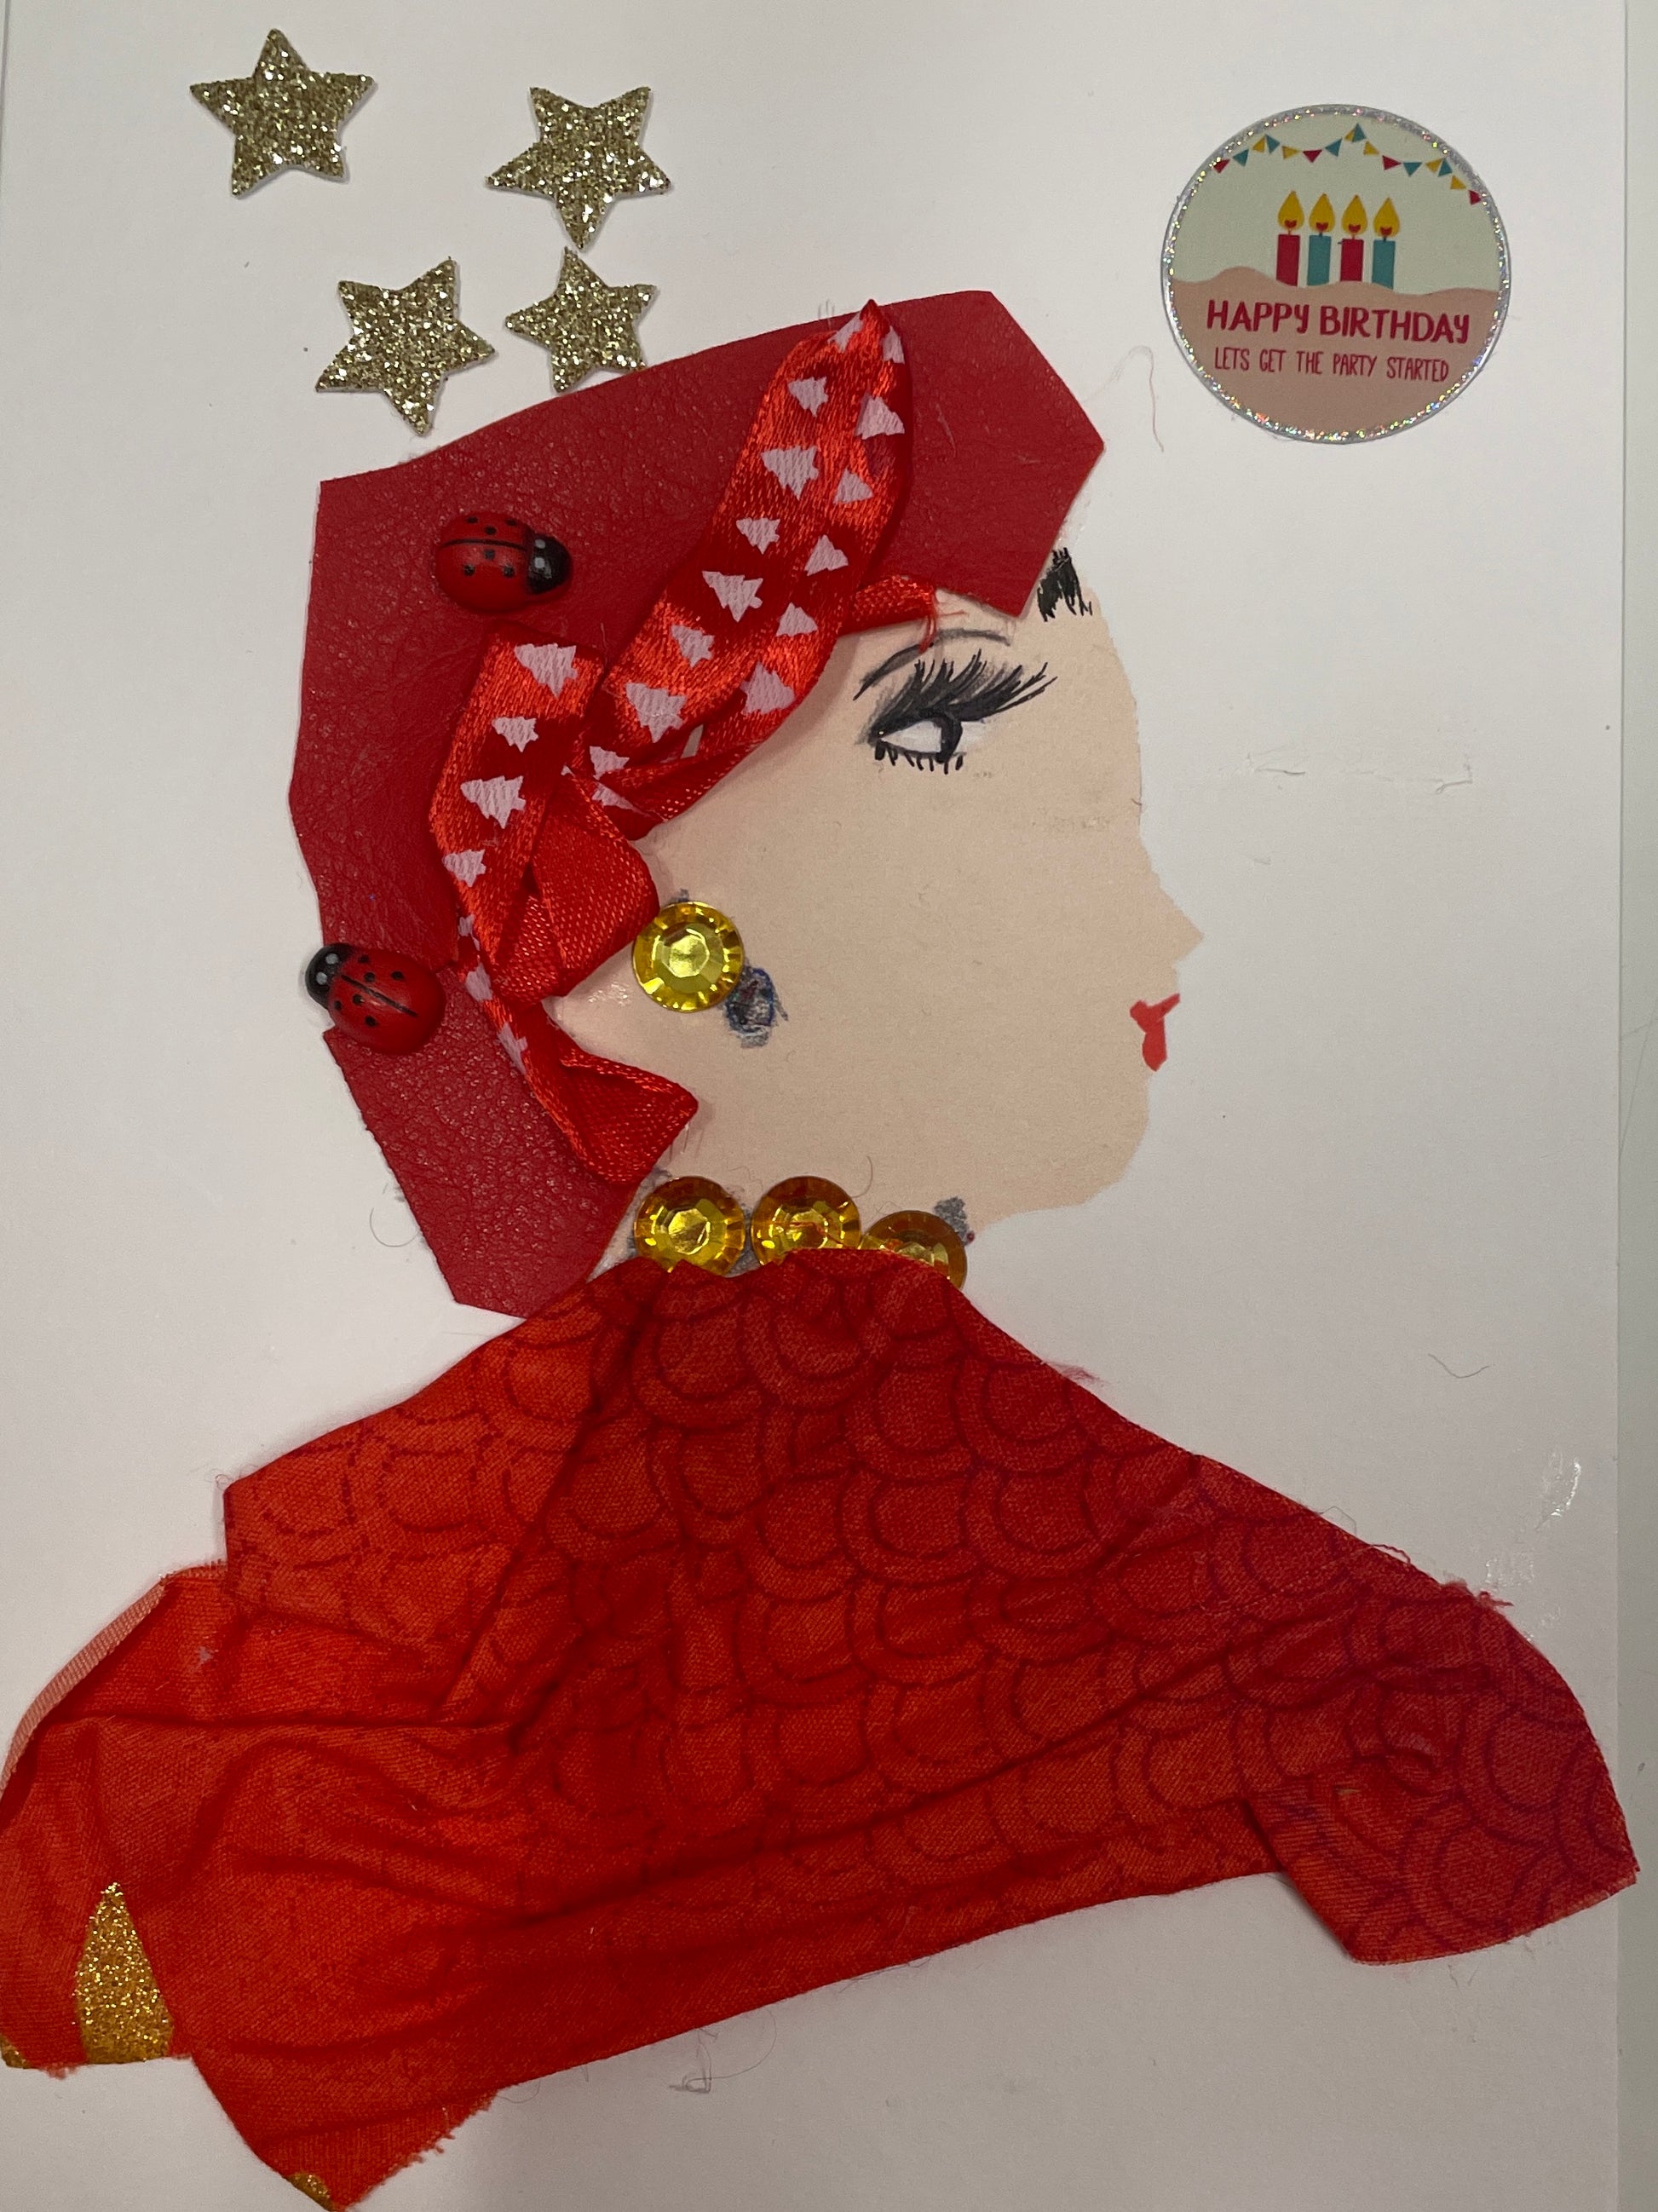 I designed this card of a woman who is named Pepper Peckham. She has a white skin tone and wears a hat that is red with two red lady bugs and a red ribbon tied on the front. She is wearing a red blouse with gold jewellery. Above her head there are four gold sparkly stars. It also says "happy birthday lets get this party started" above her head as well.  